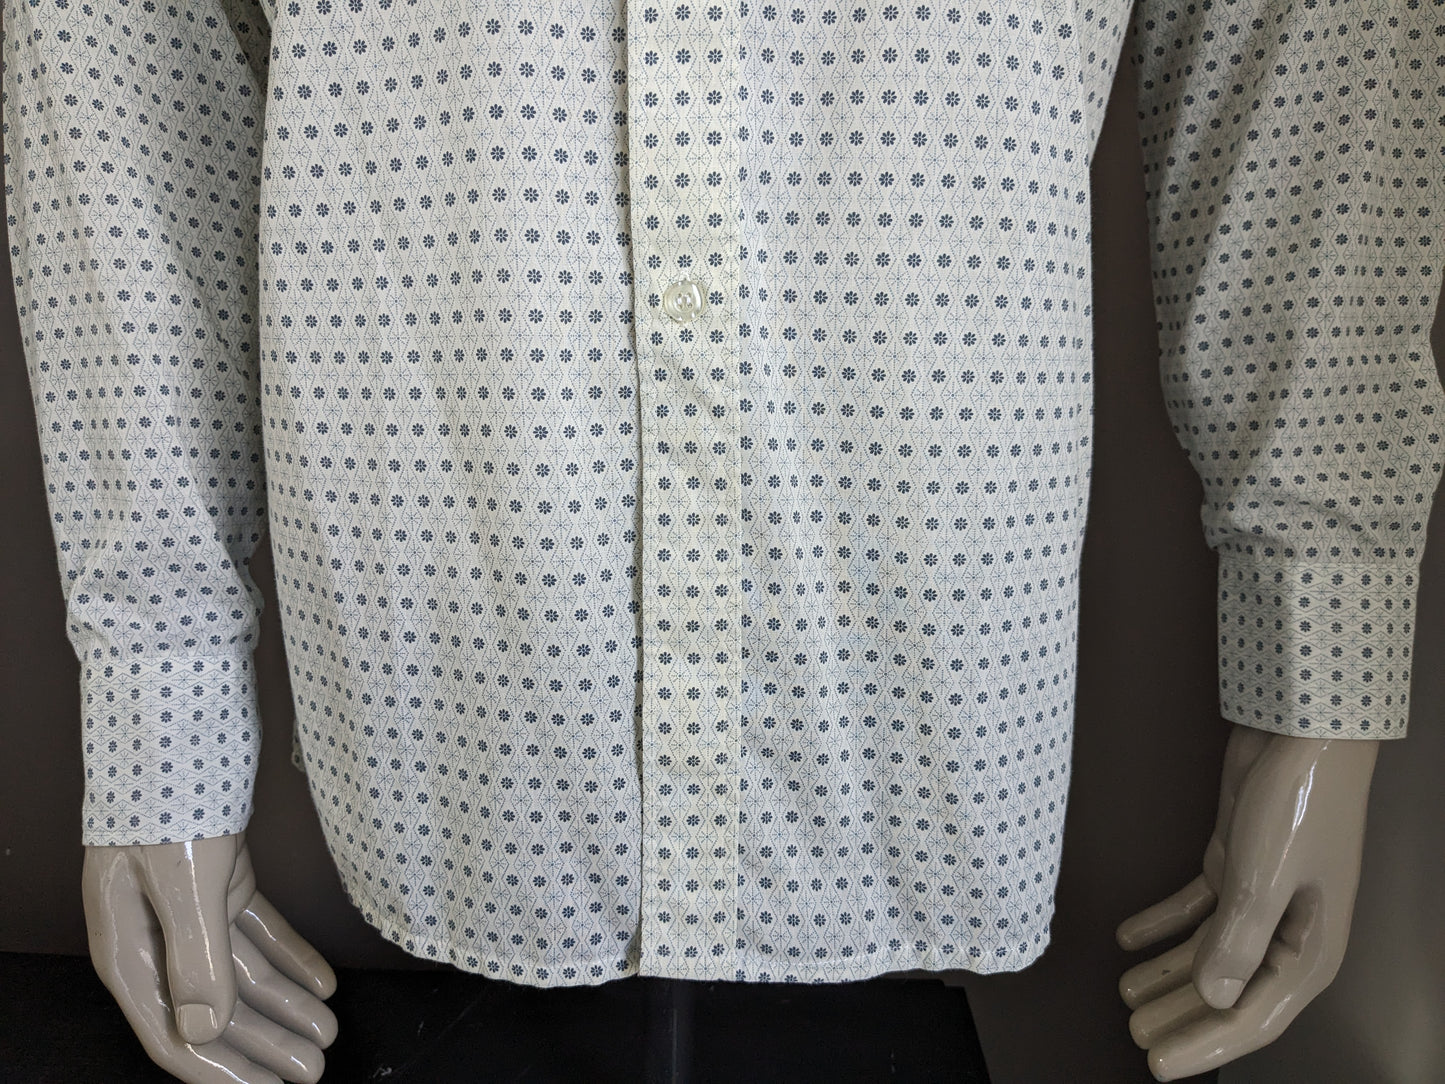 Vintage Fabio 70's shirt with point collar. Beige gray floral. Size XL.